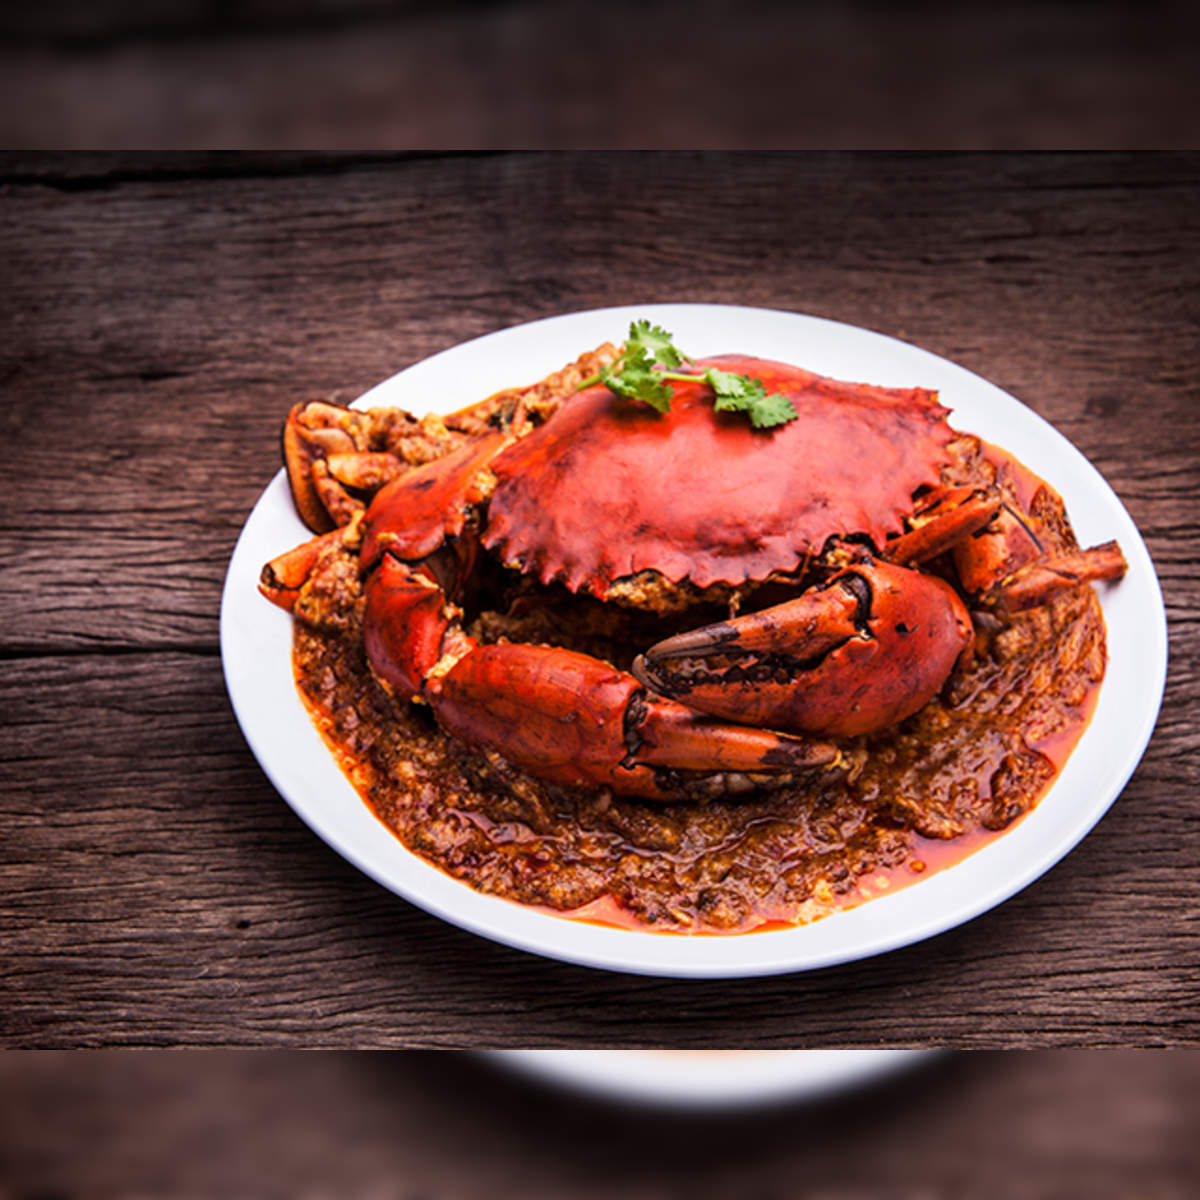 Food Guide: From Chilli Crab in Singapore to Fish Cakes in Bangkok